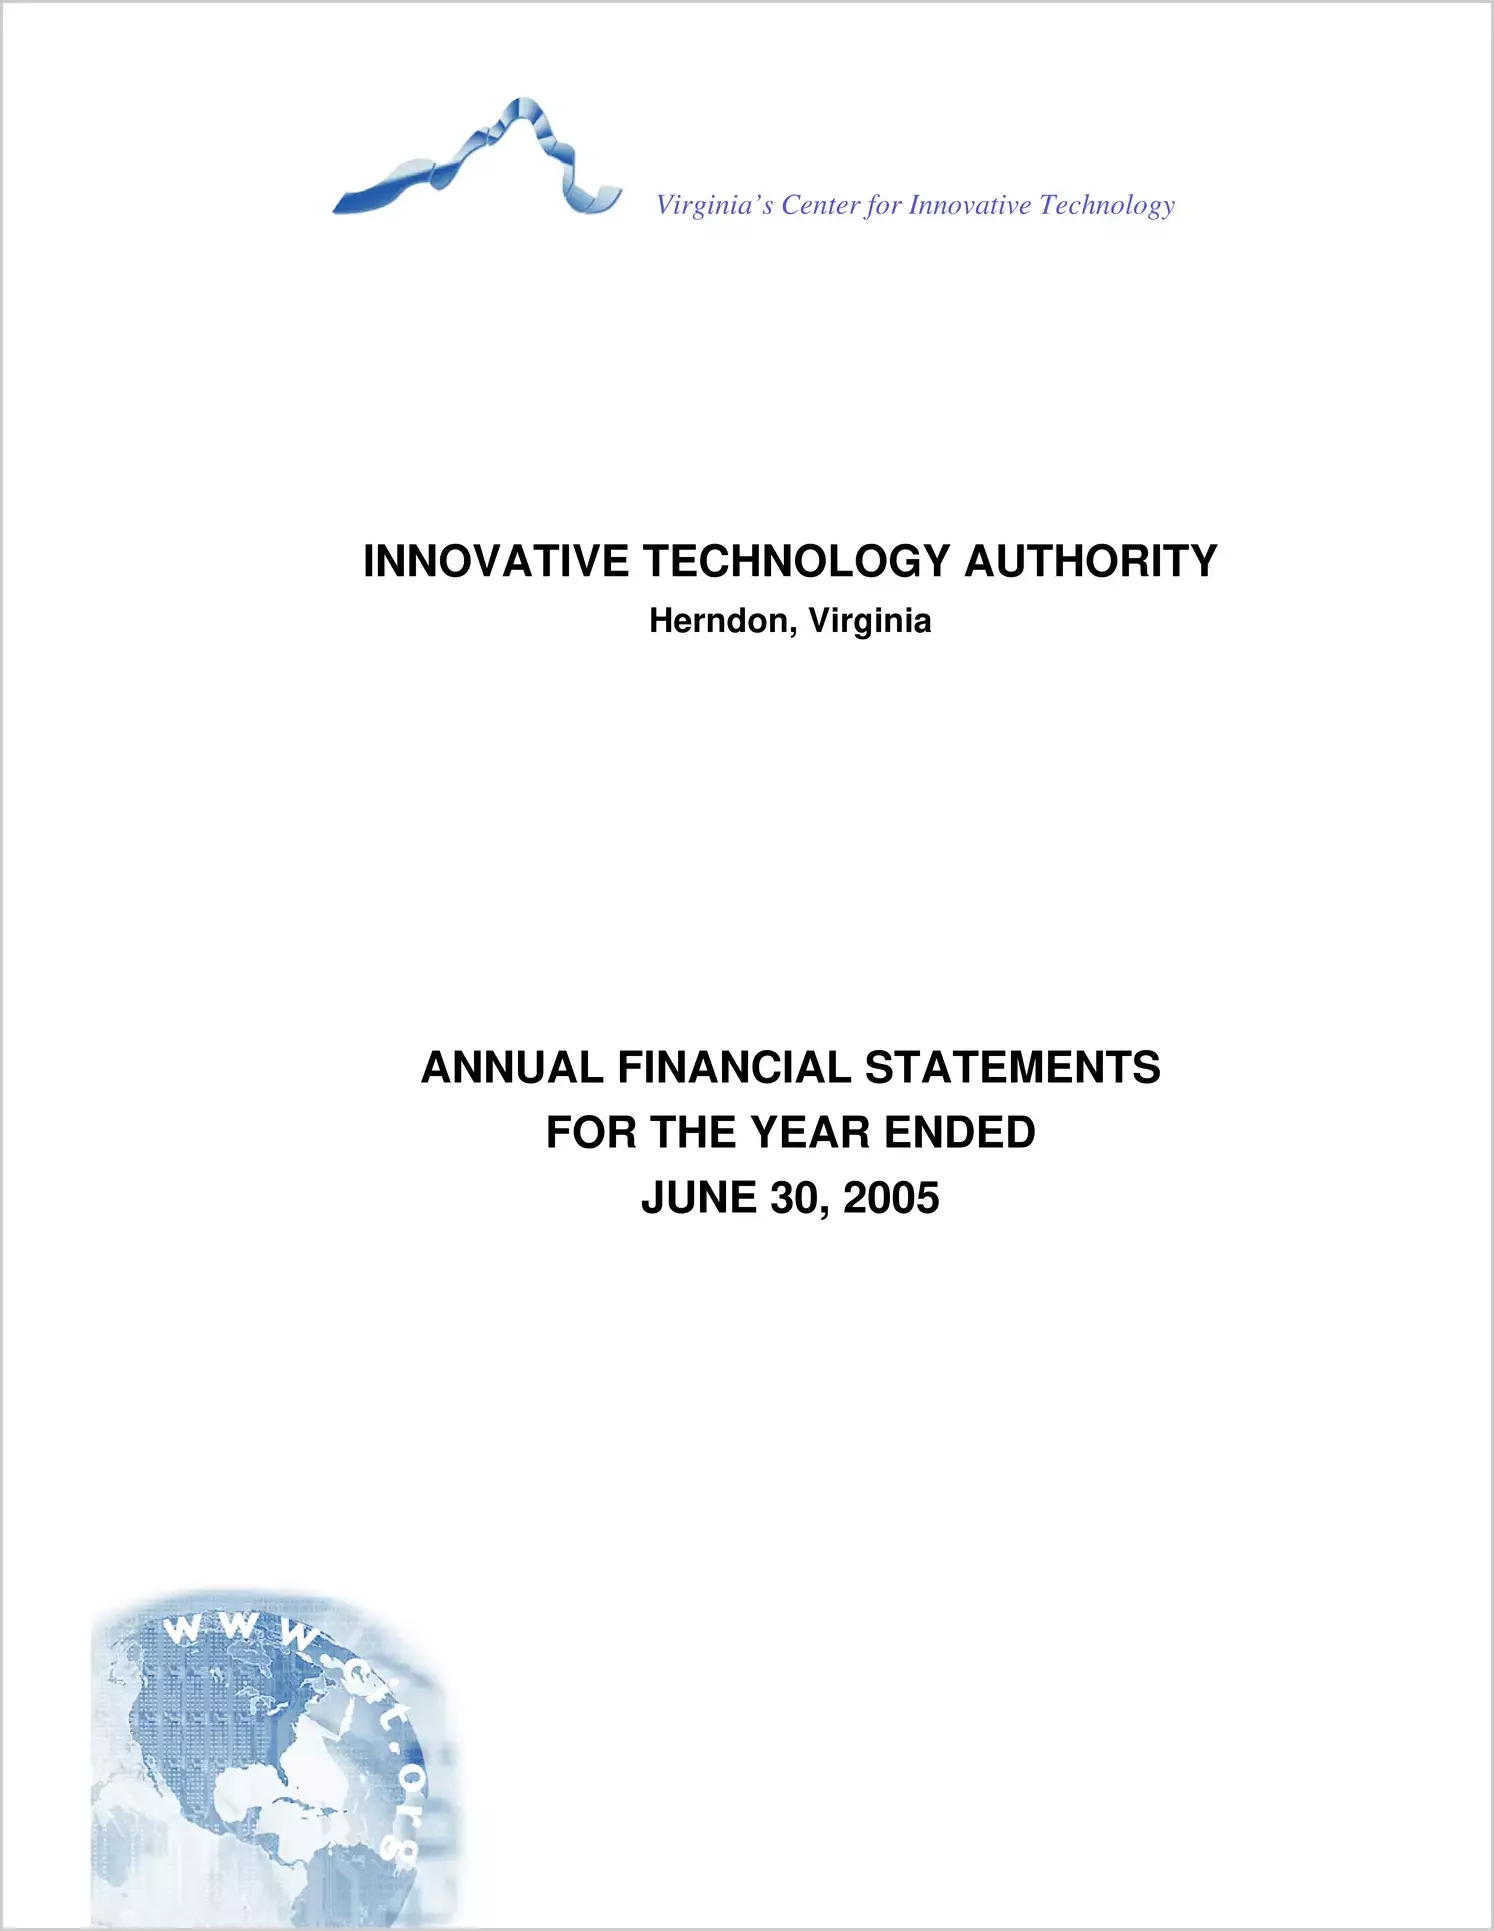 Innovative Technology Authority for the year ended June 30, 2005